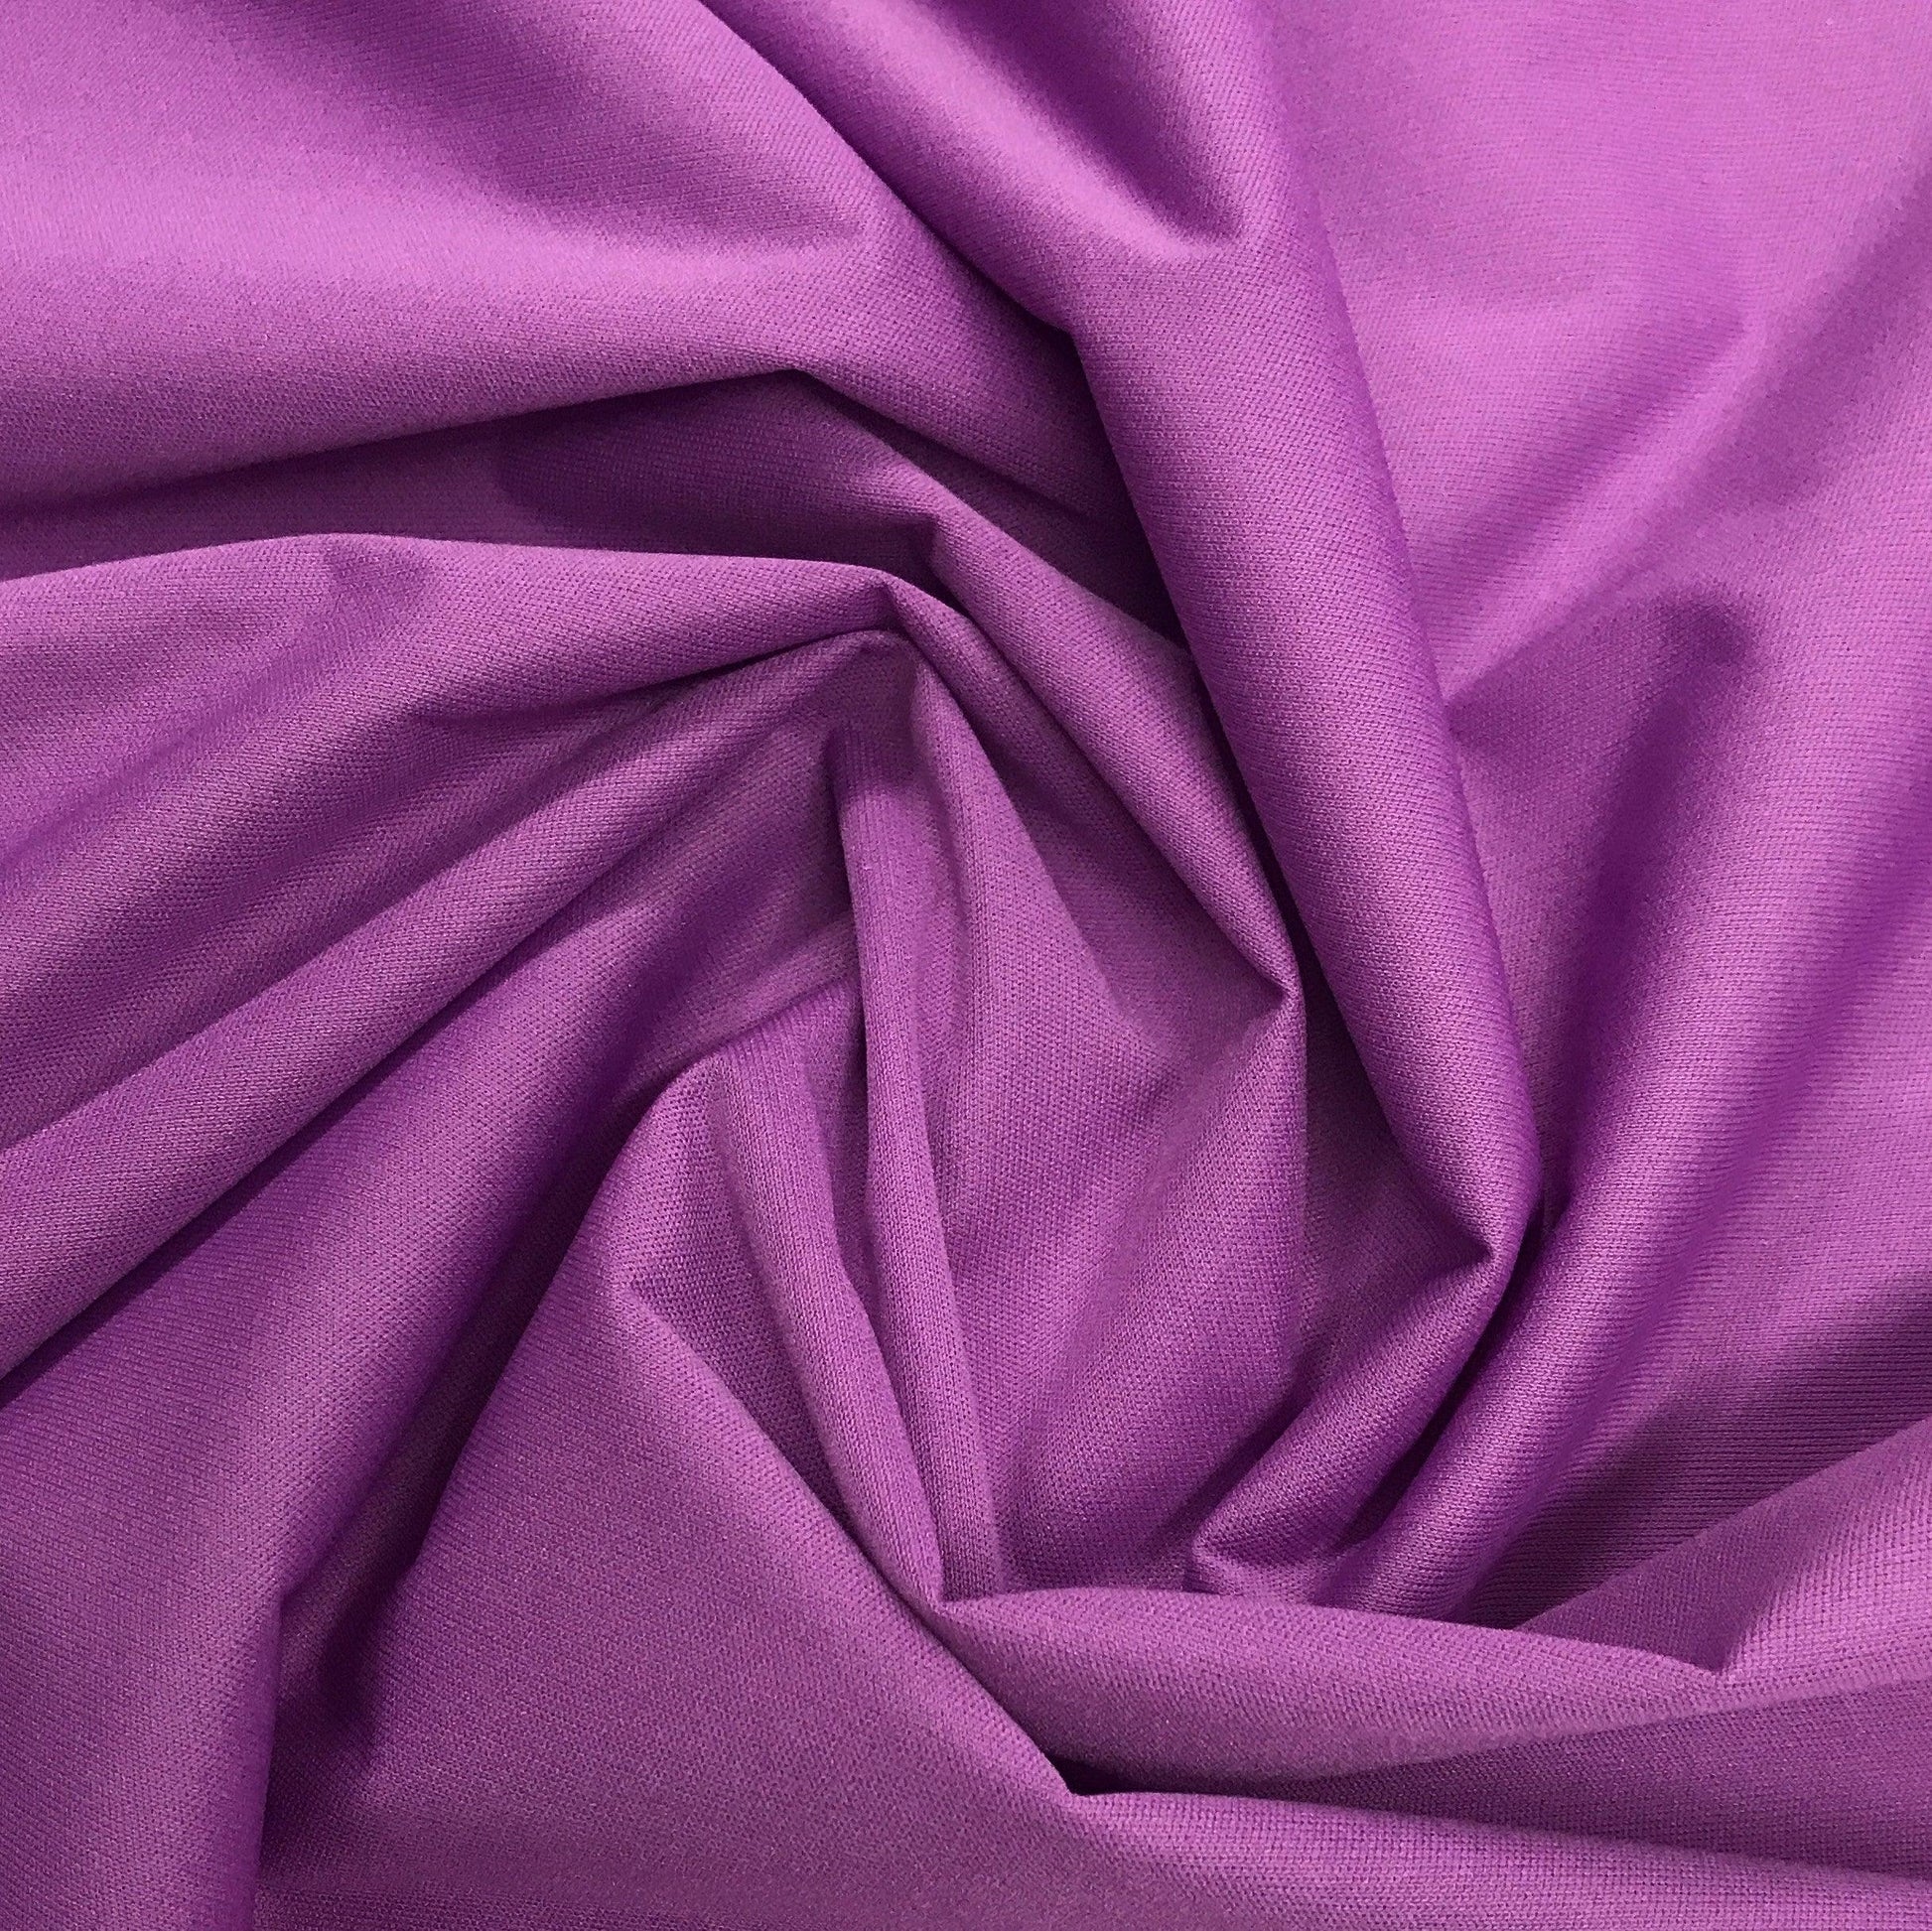 Violet 1 mil PUL Fabric - Made in the USA - Nature's Fabrics